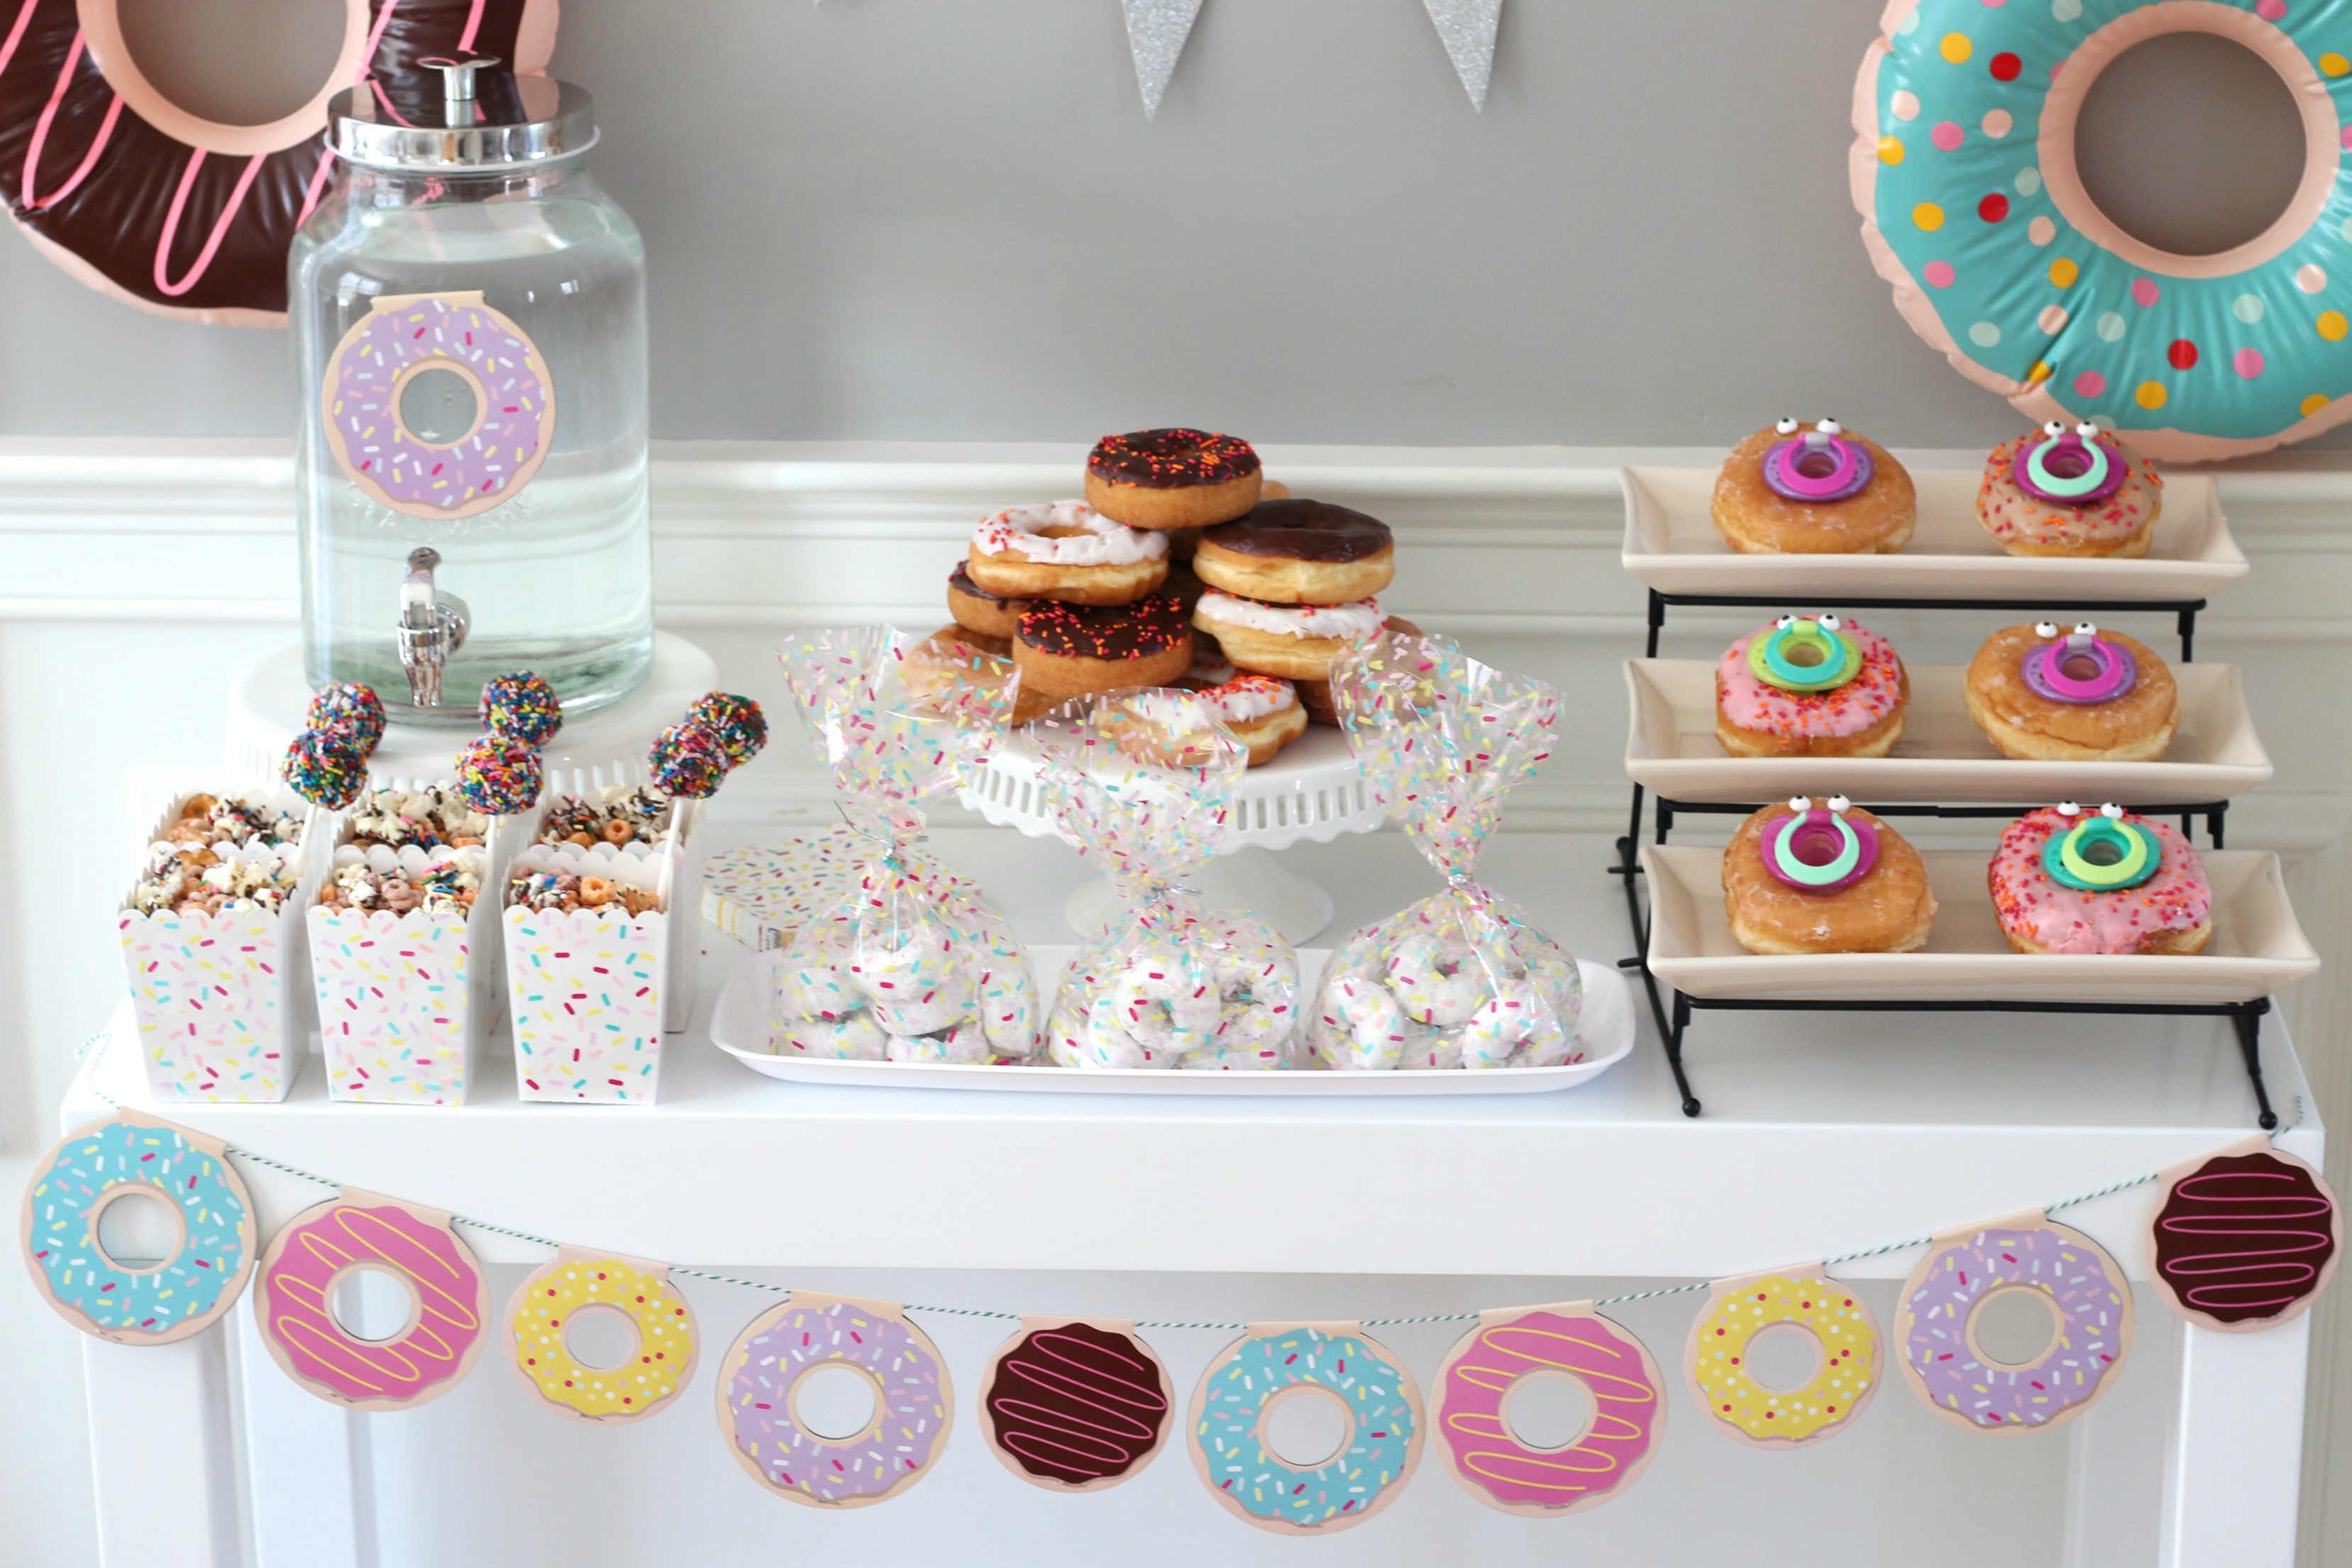 Donut Sprinkle Baby Shower Decorations Boy or Girl – Sweet Baby